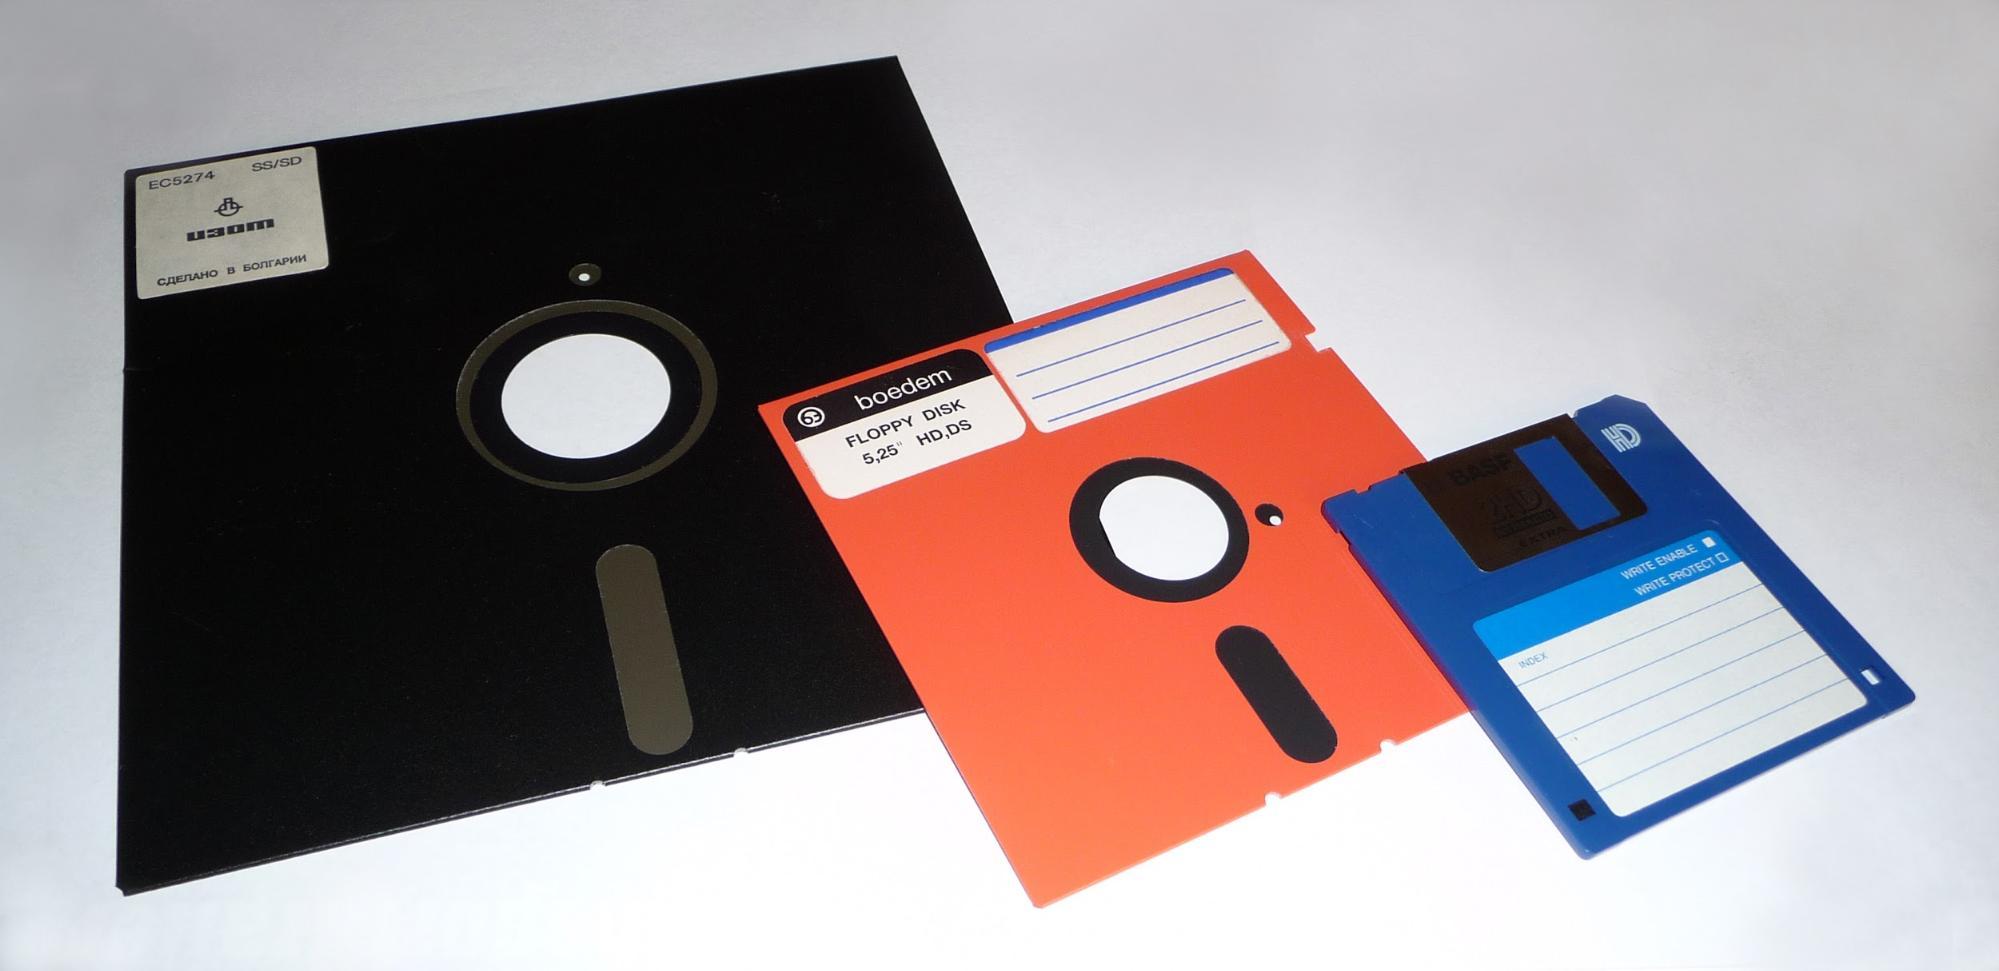 1971 - IBM distributed the first 8” Floppy disk made of magnetic film encased in plastic.